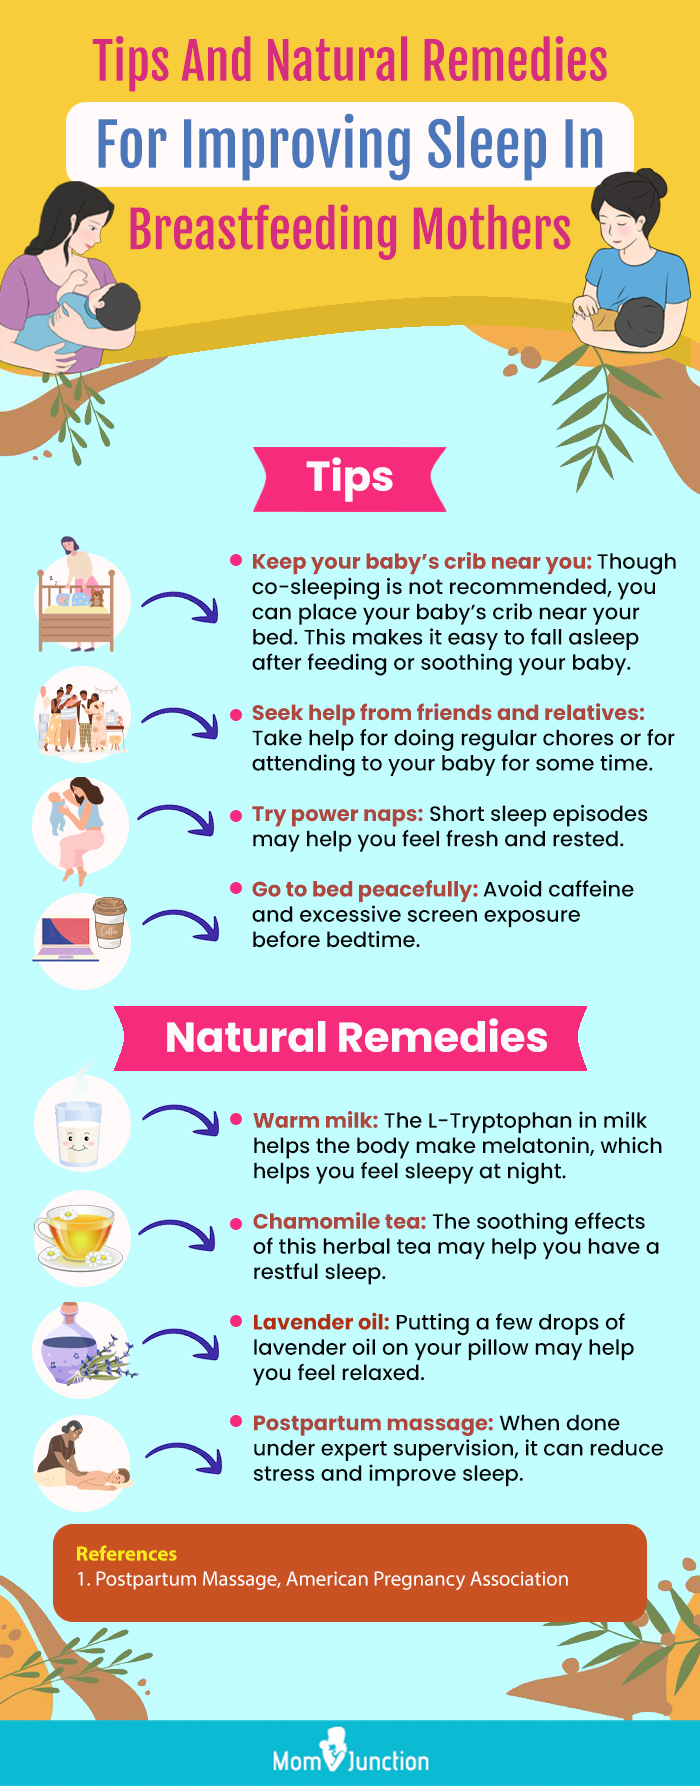 tips and natural remedies for improving sleep in breastfeeding mothers (infographic)